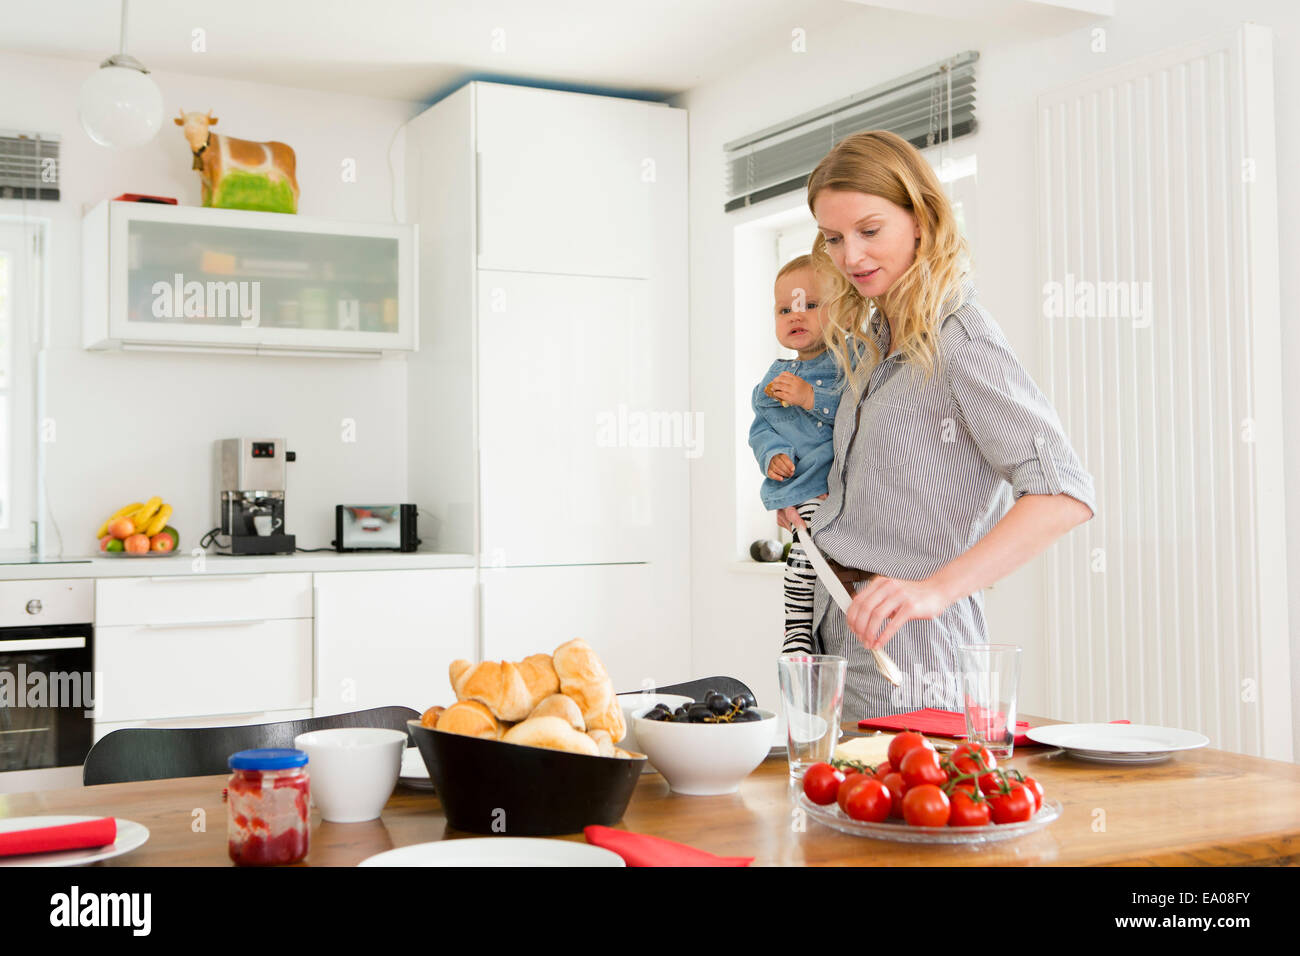 Mother setting kitchen table while holding baby daughter Stock Photo